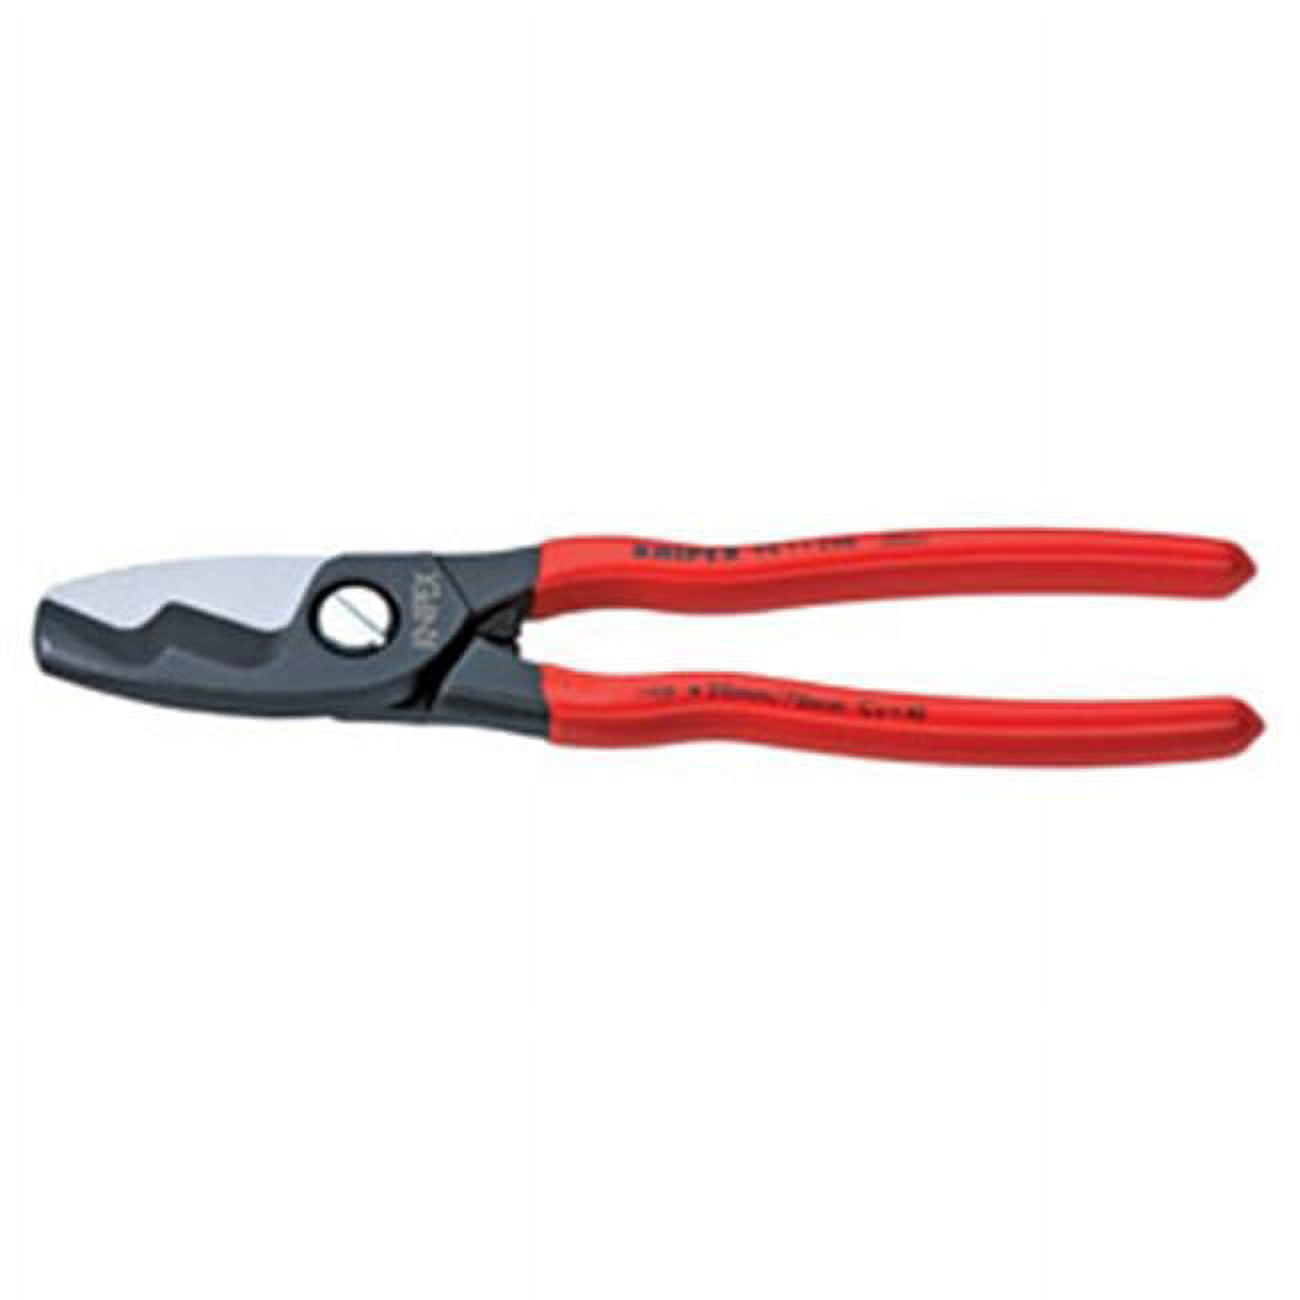 HT-126 Home Tools Mini Wire Cutter 